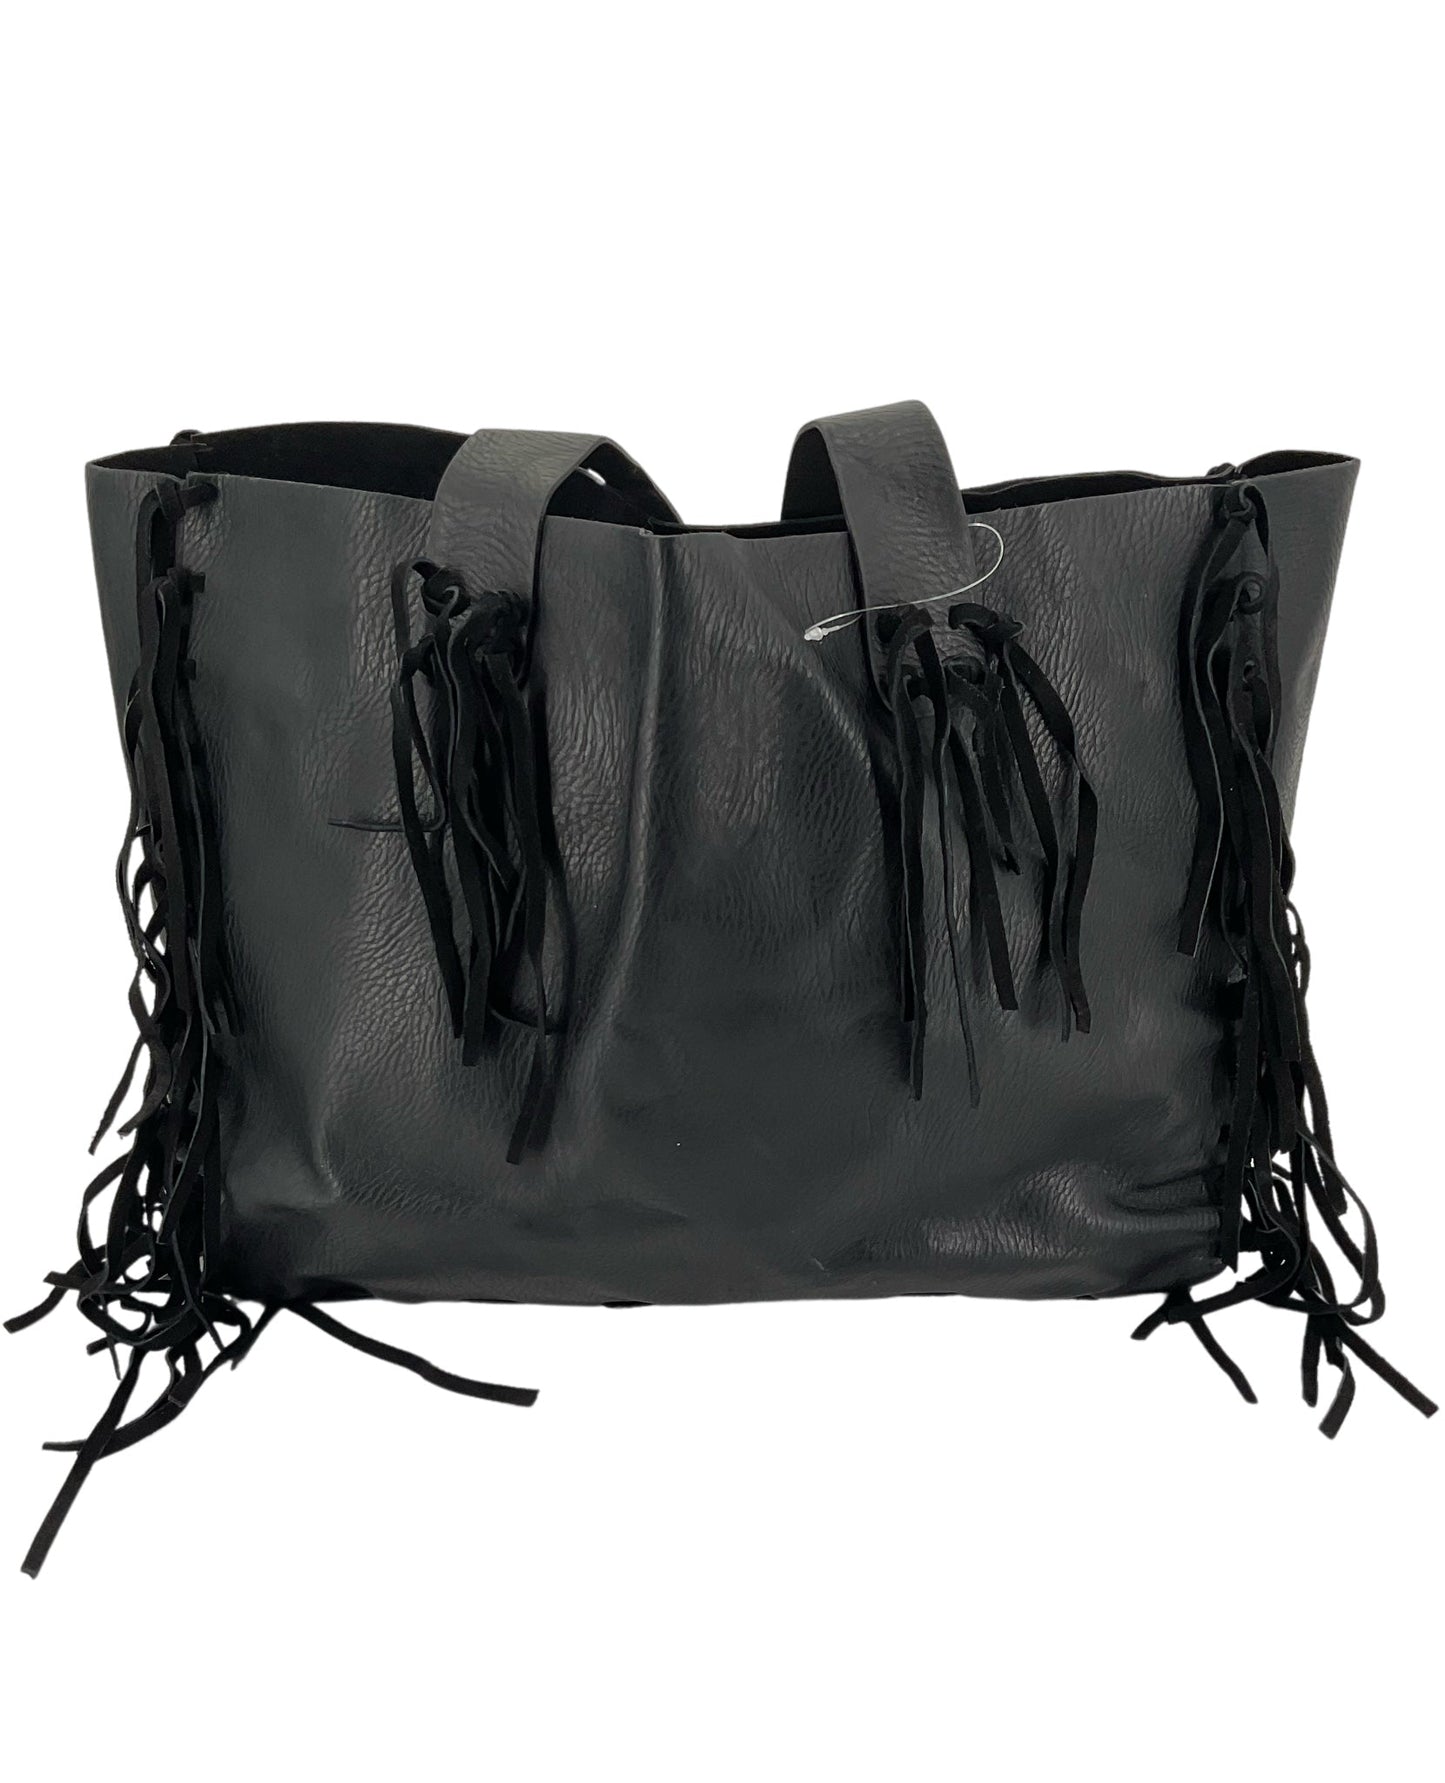 STREET LEVEL TRIPLE 7 VEGAN BLACK 2 PIECE TOTE AND POUCH